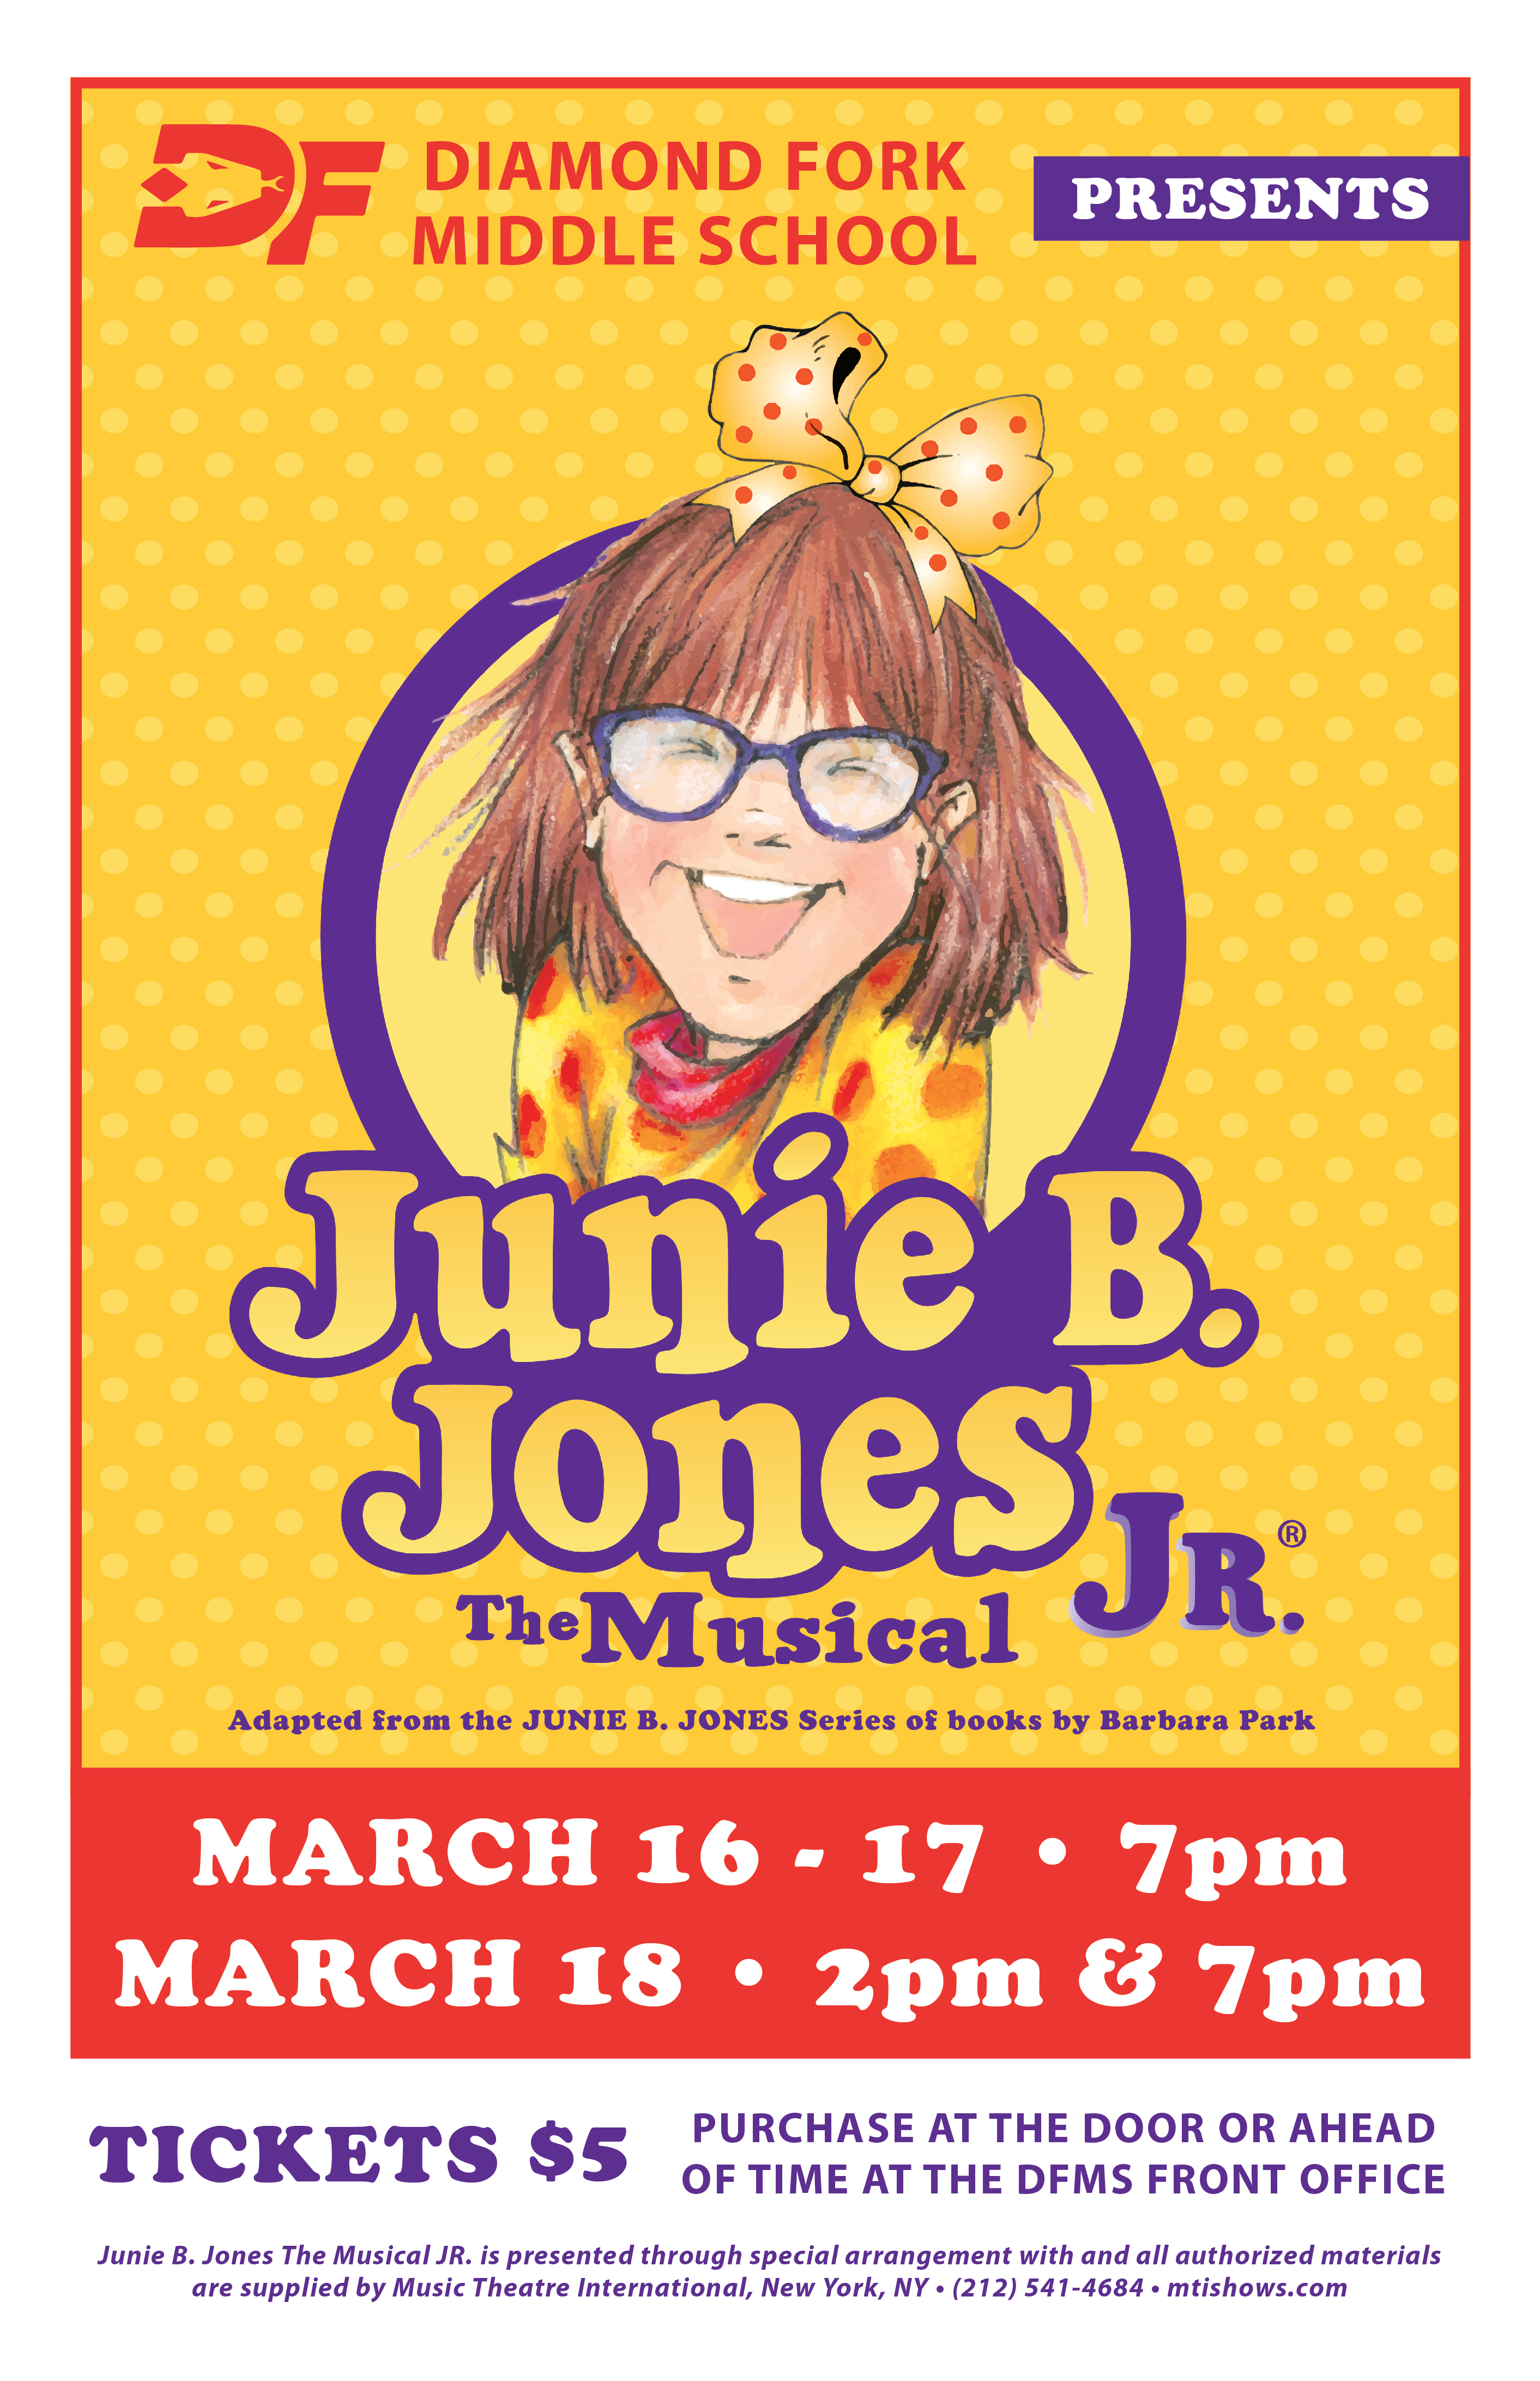 Poster advertising Junie B. Jones the Musical March 16-18th 